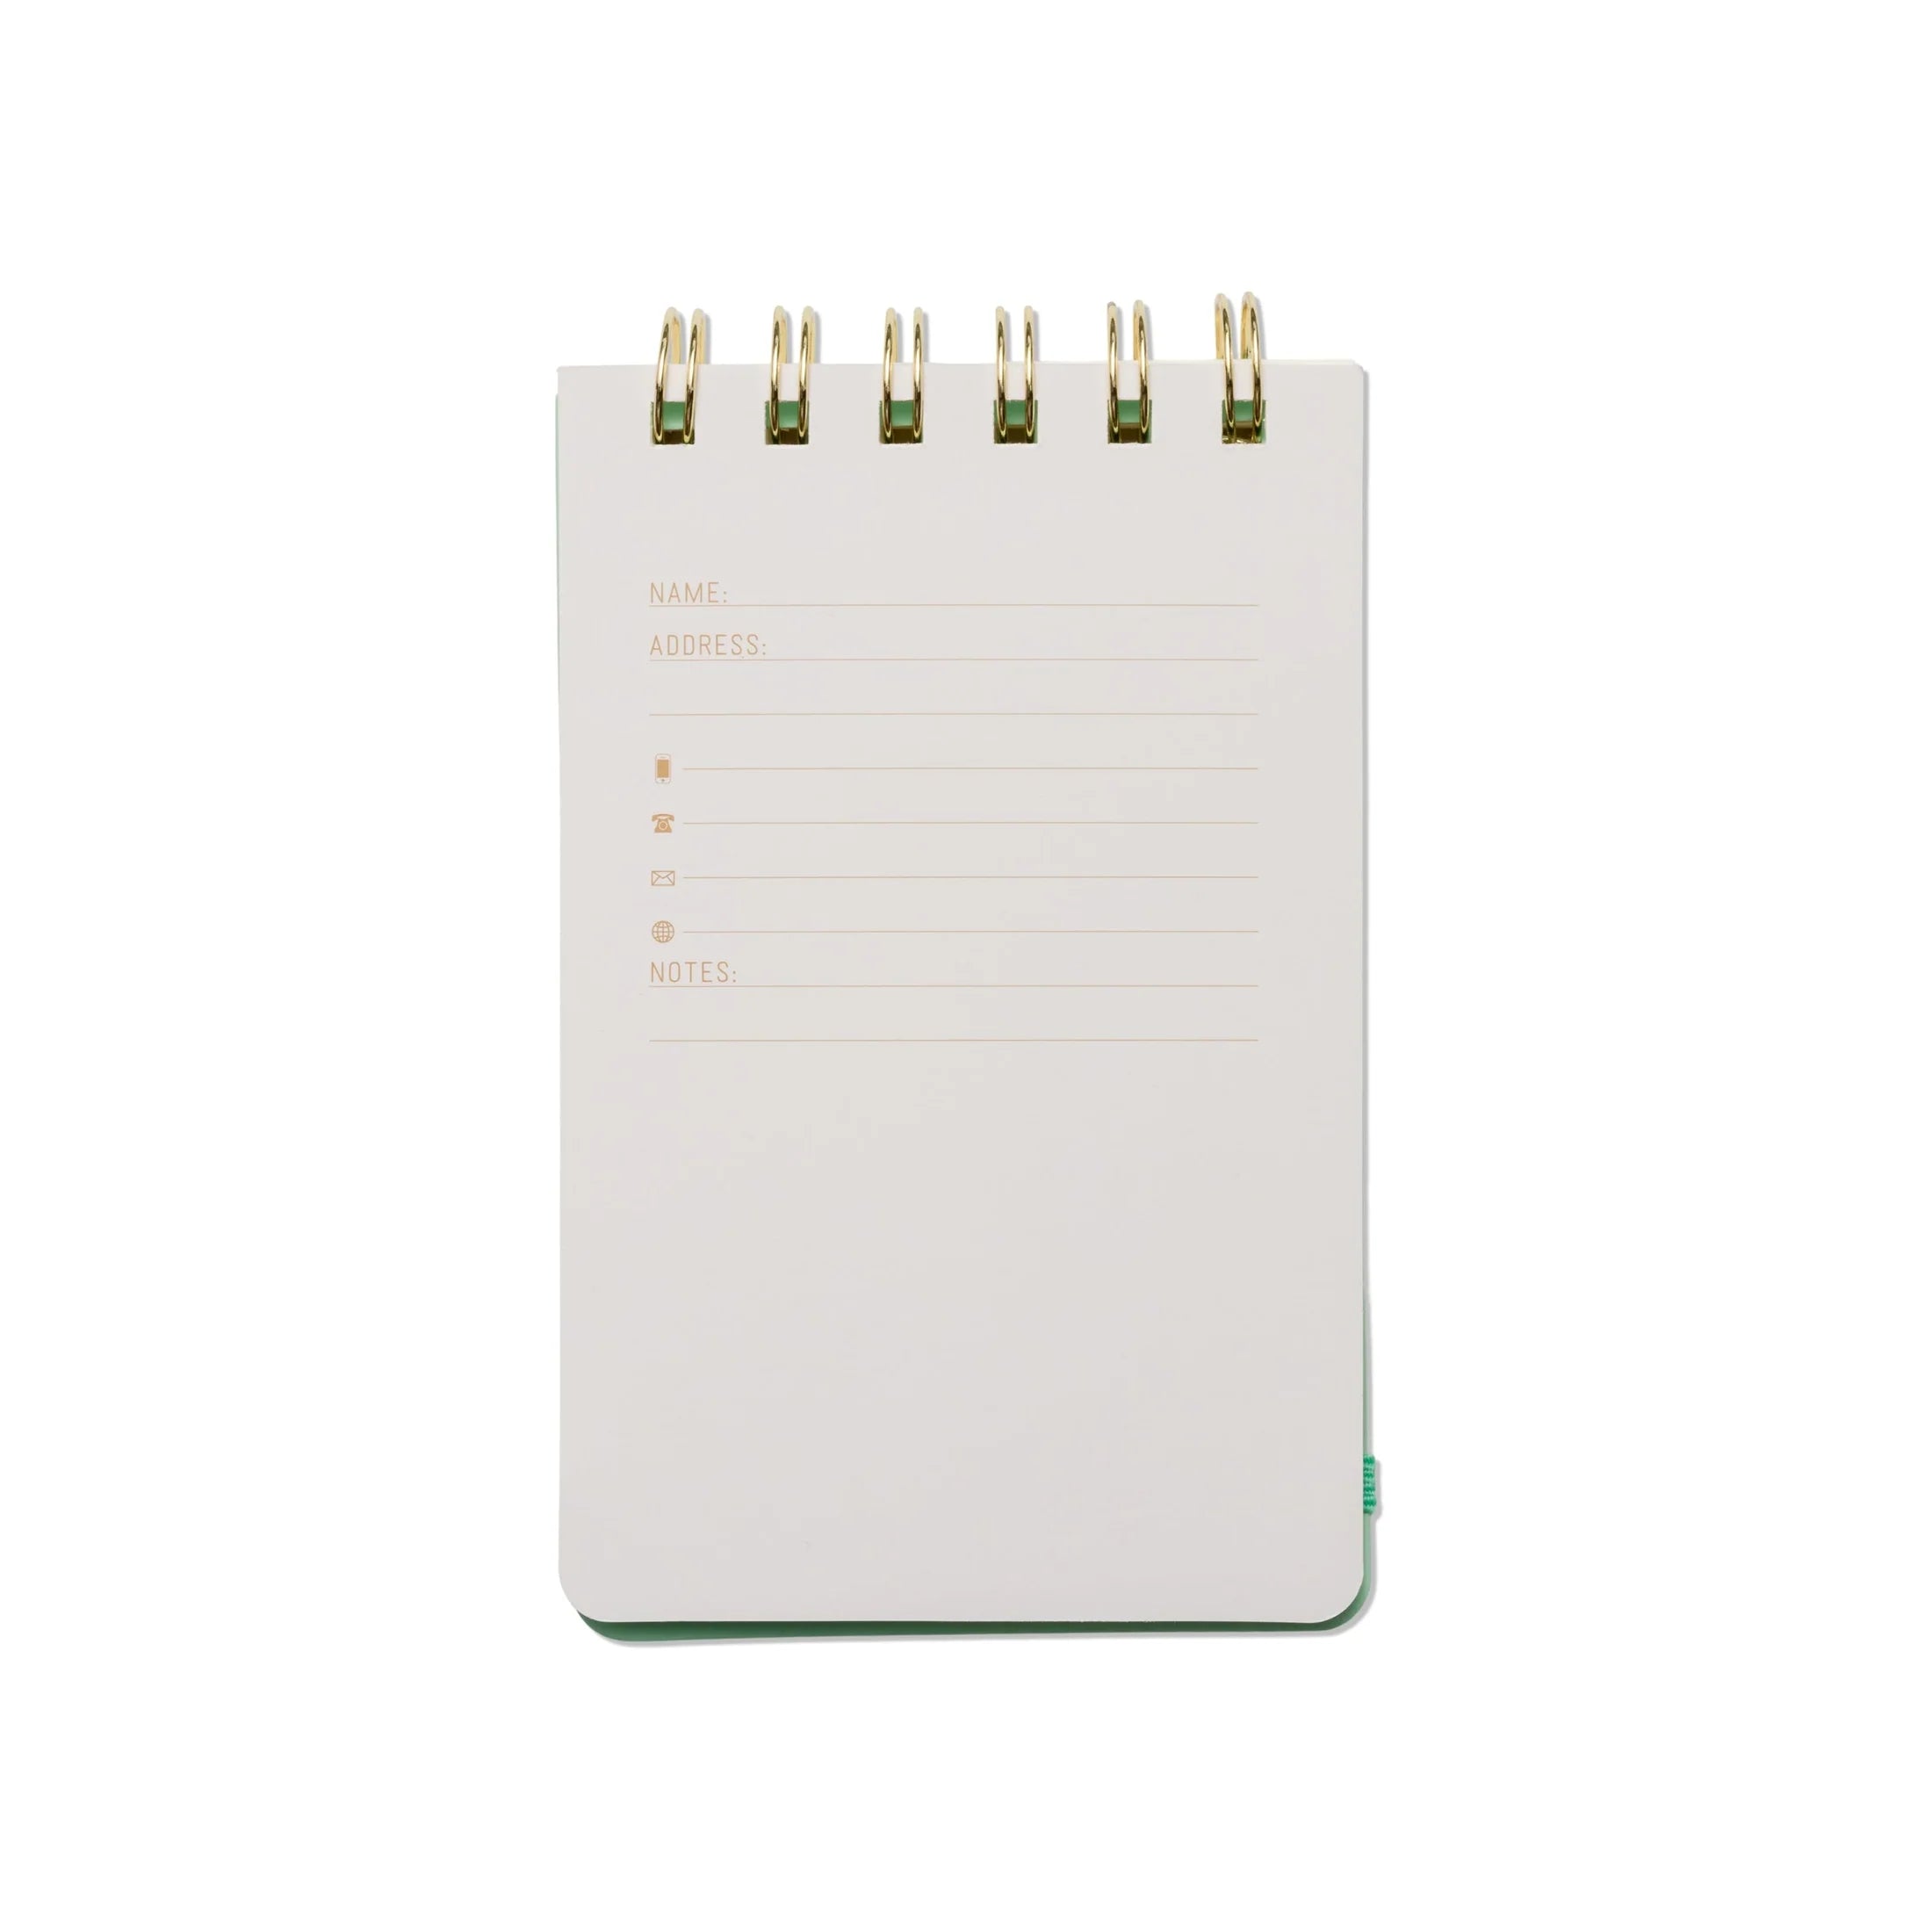 Fabulous Gifts Gentlemens Hardware Vintage Sass Twin Wire Notepad - Lucky You by Weirs of Baggot Street